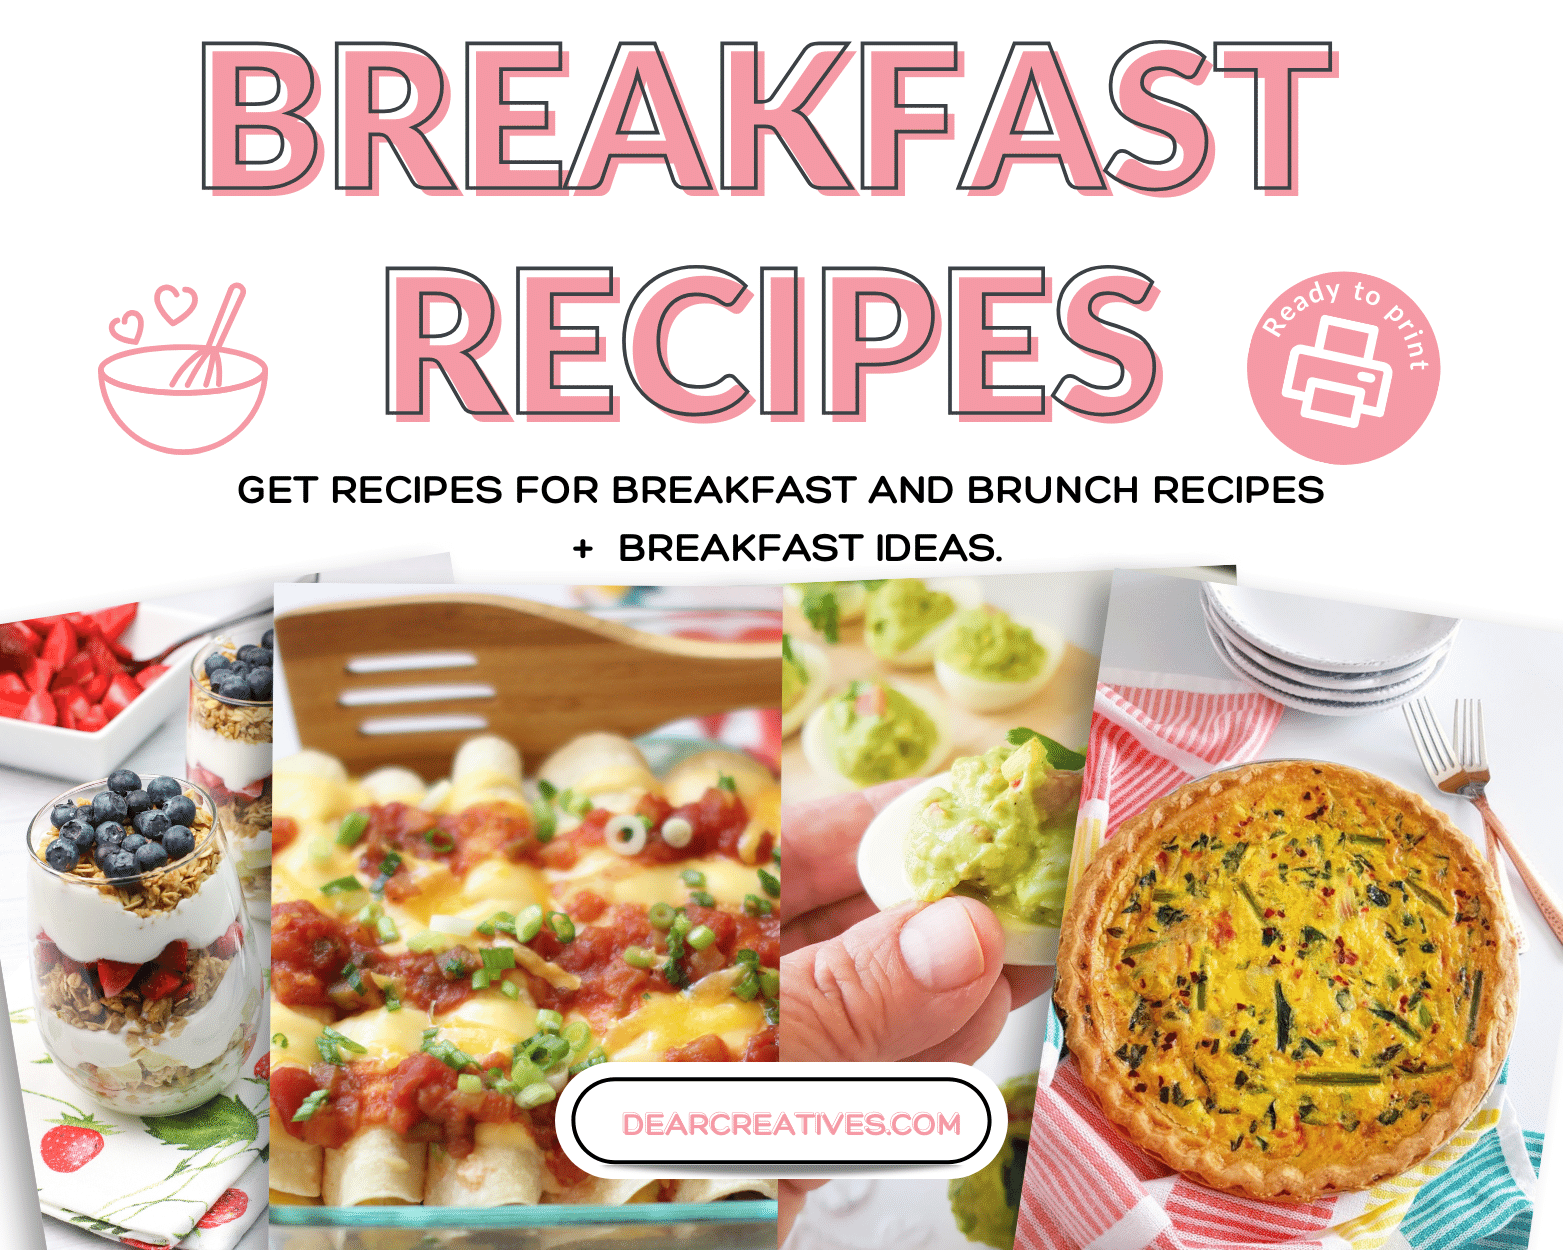 https://www.dearcreatives.com/wp-content/uploads/2023/12/Breakfast-Recipes-Get-Recipes-for-Breakfast-Brunch-Recipes-and-Breakfast-Ideas.-A-variety-of-easy-recipes-quick-make-ahead-with-eggs-no-eggs.DearCreatives.com-.png